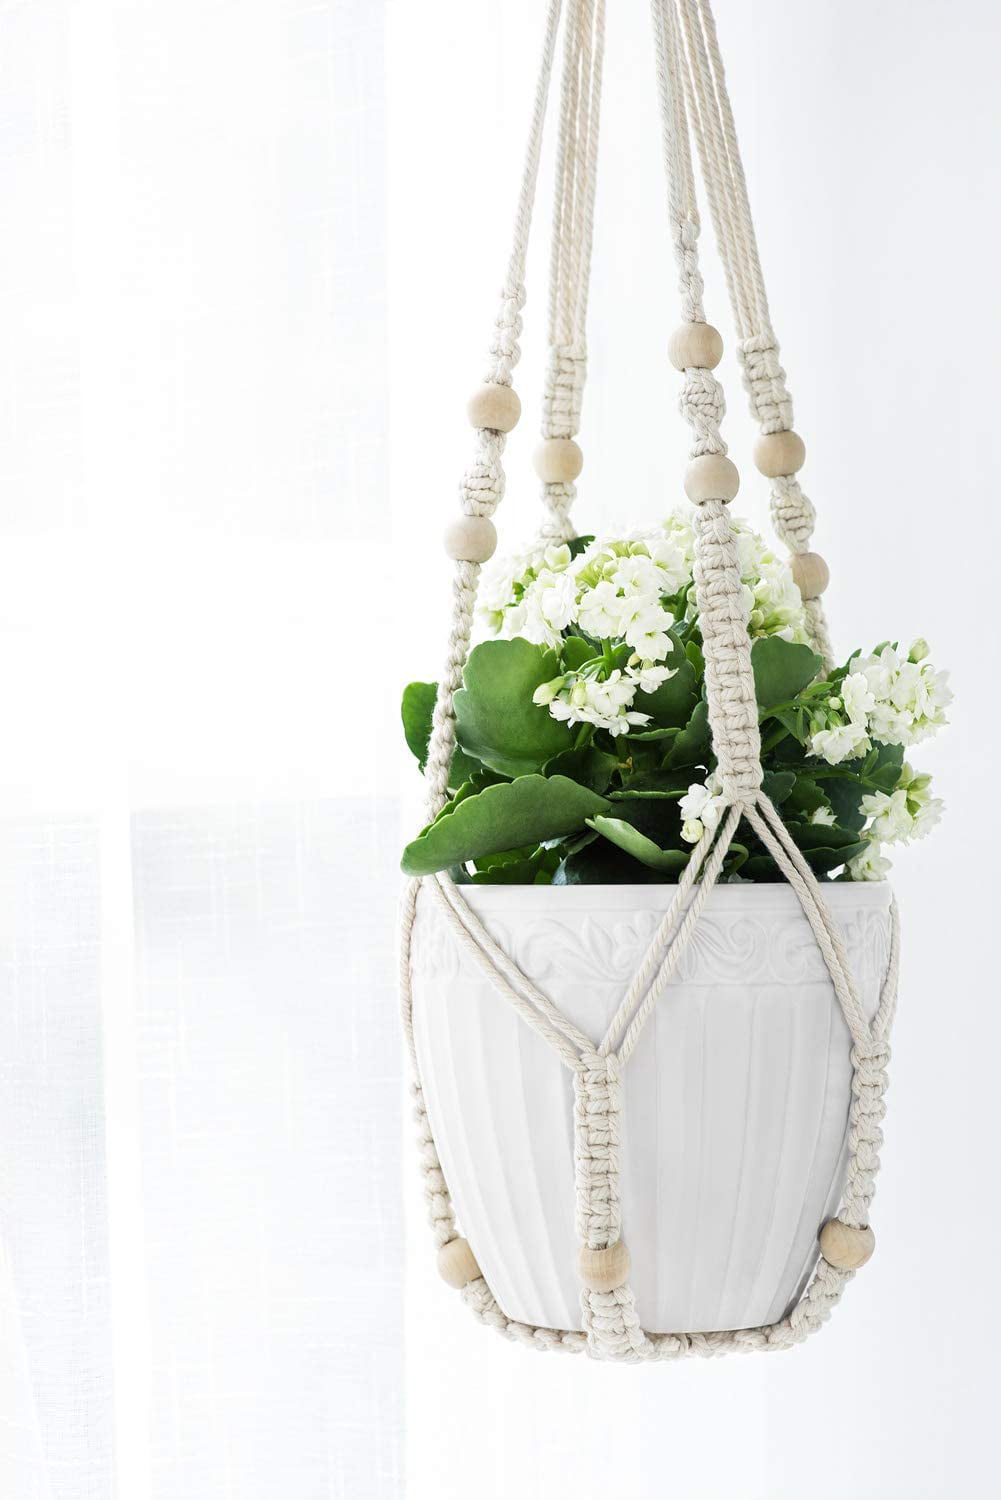 Mkono 2Pcs Macrame Plant Hangers Indoor Outdoor Hanging Planter Basket Cotton Rope with Beads No Tassels 35 Inch 